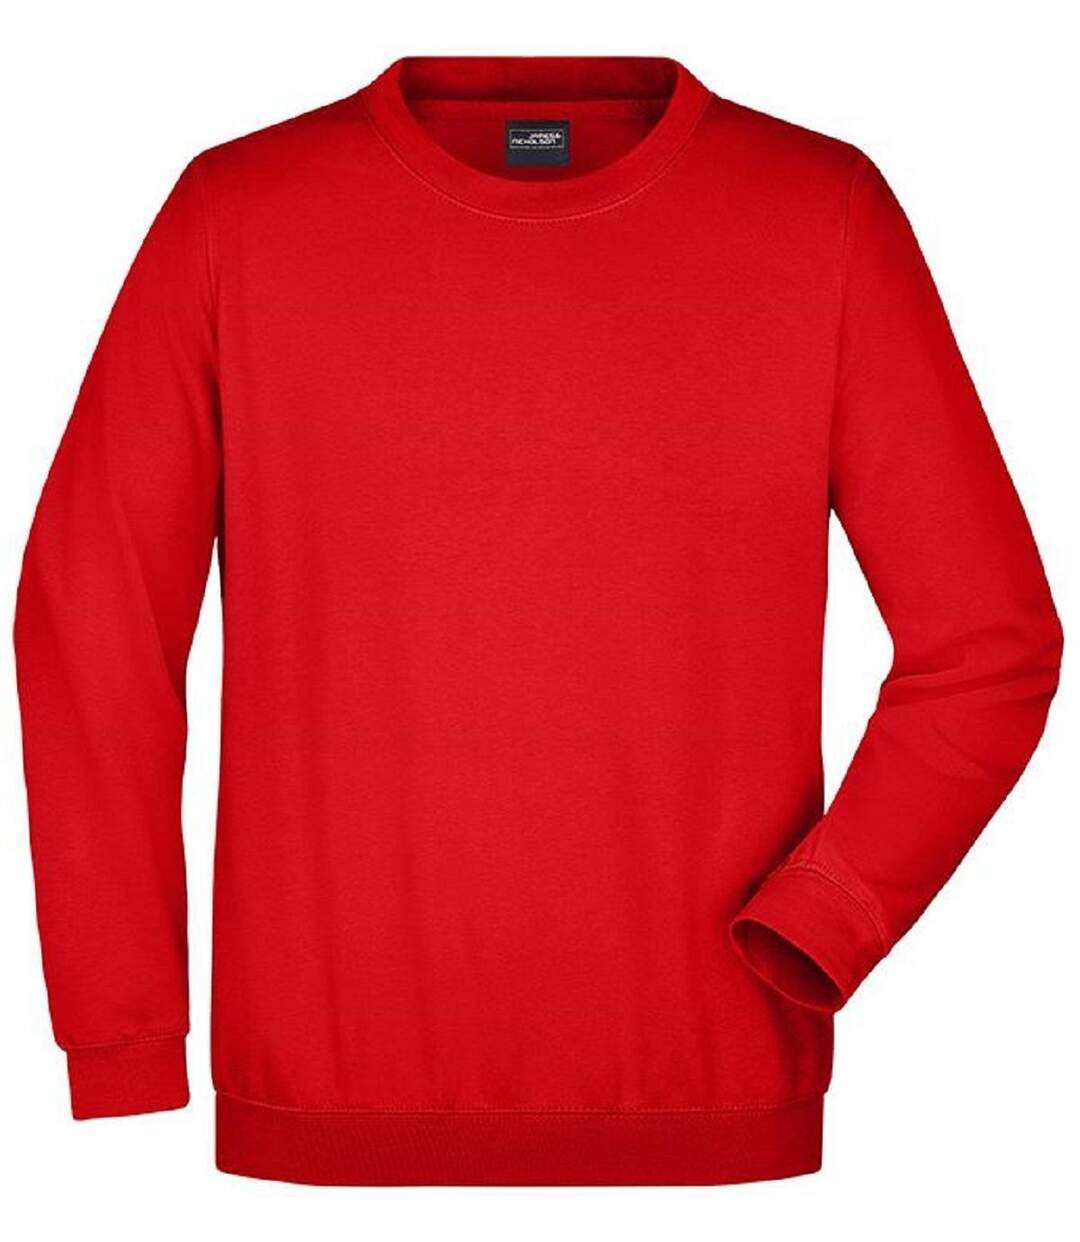 Sweat-shirt col rond - JN040 - rouge tomate - mixte homme femme